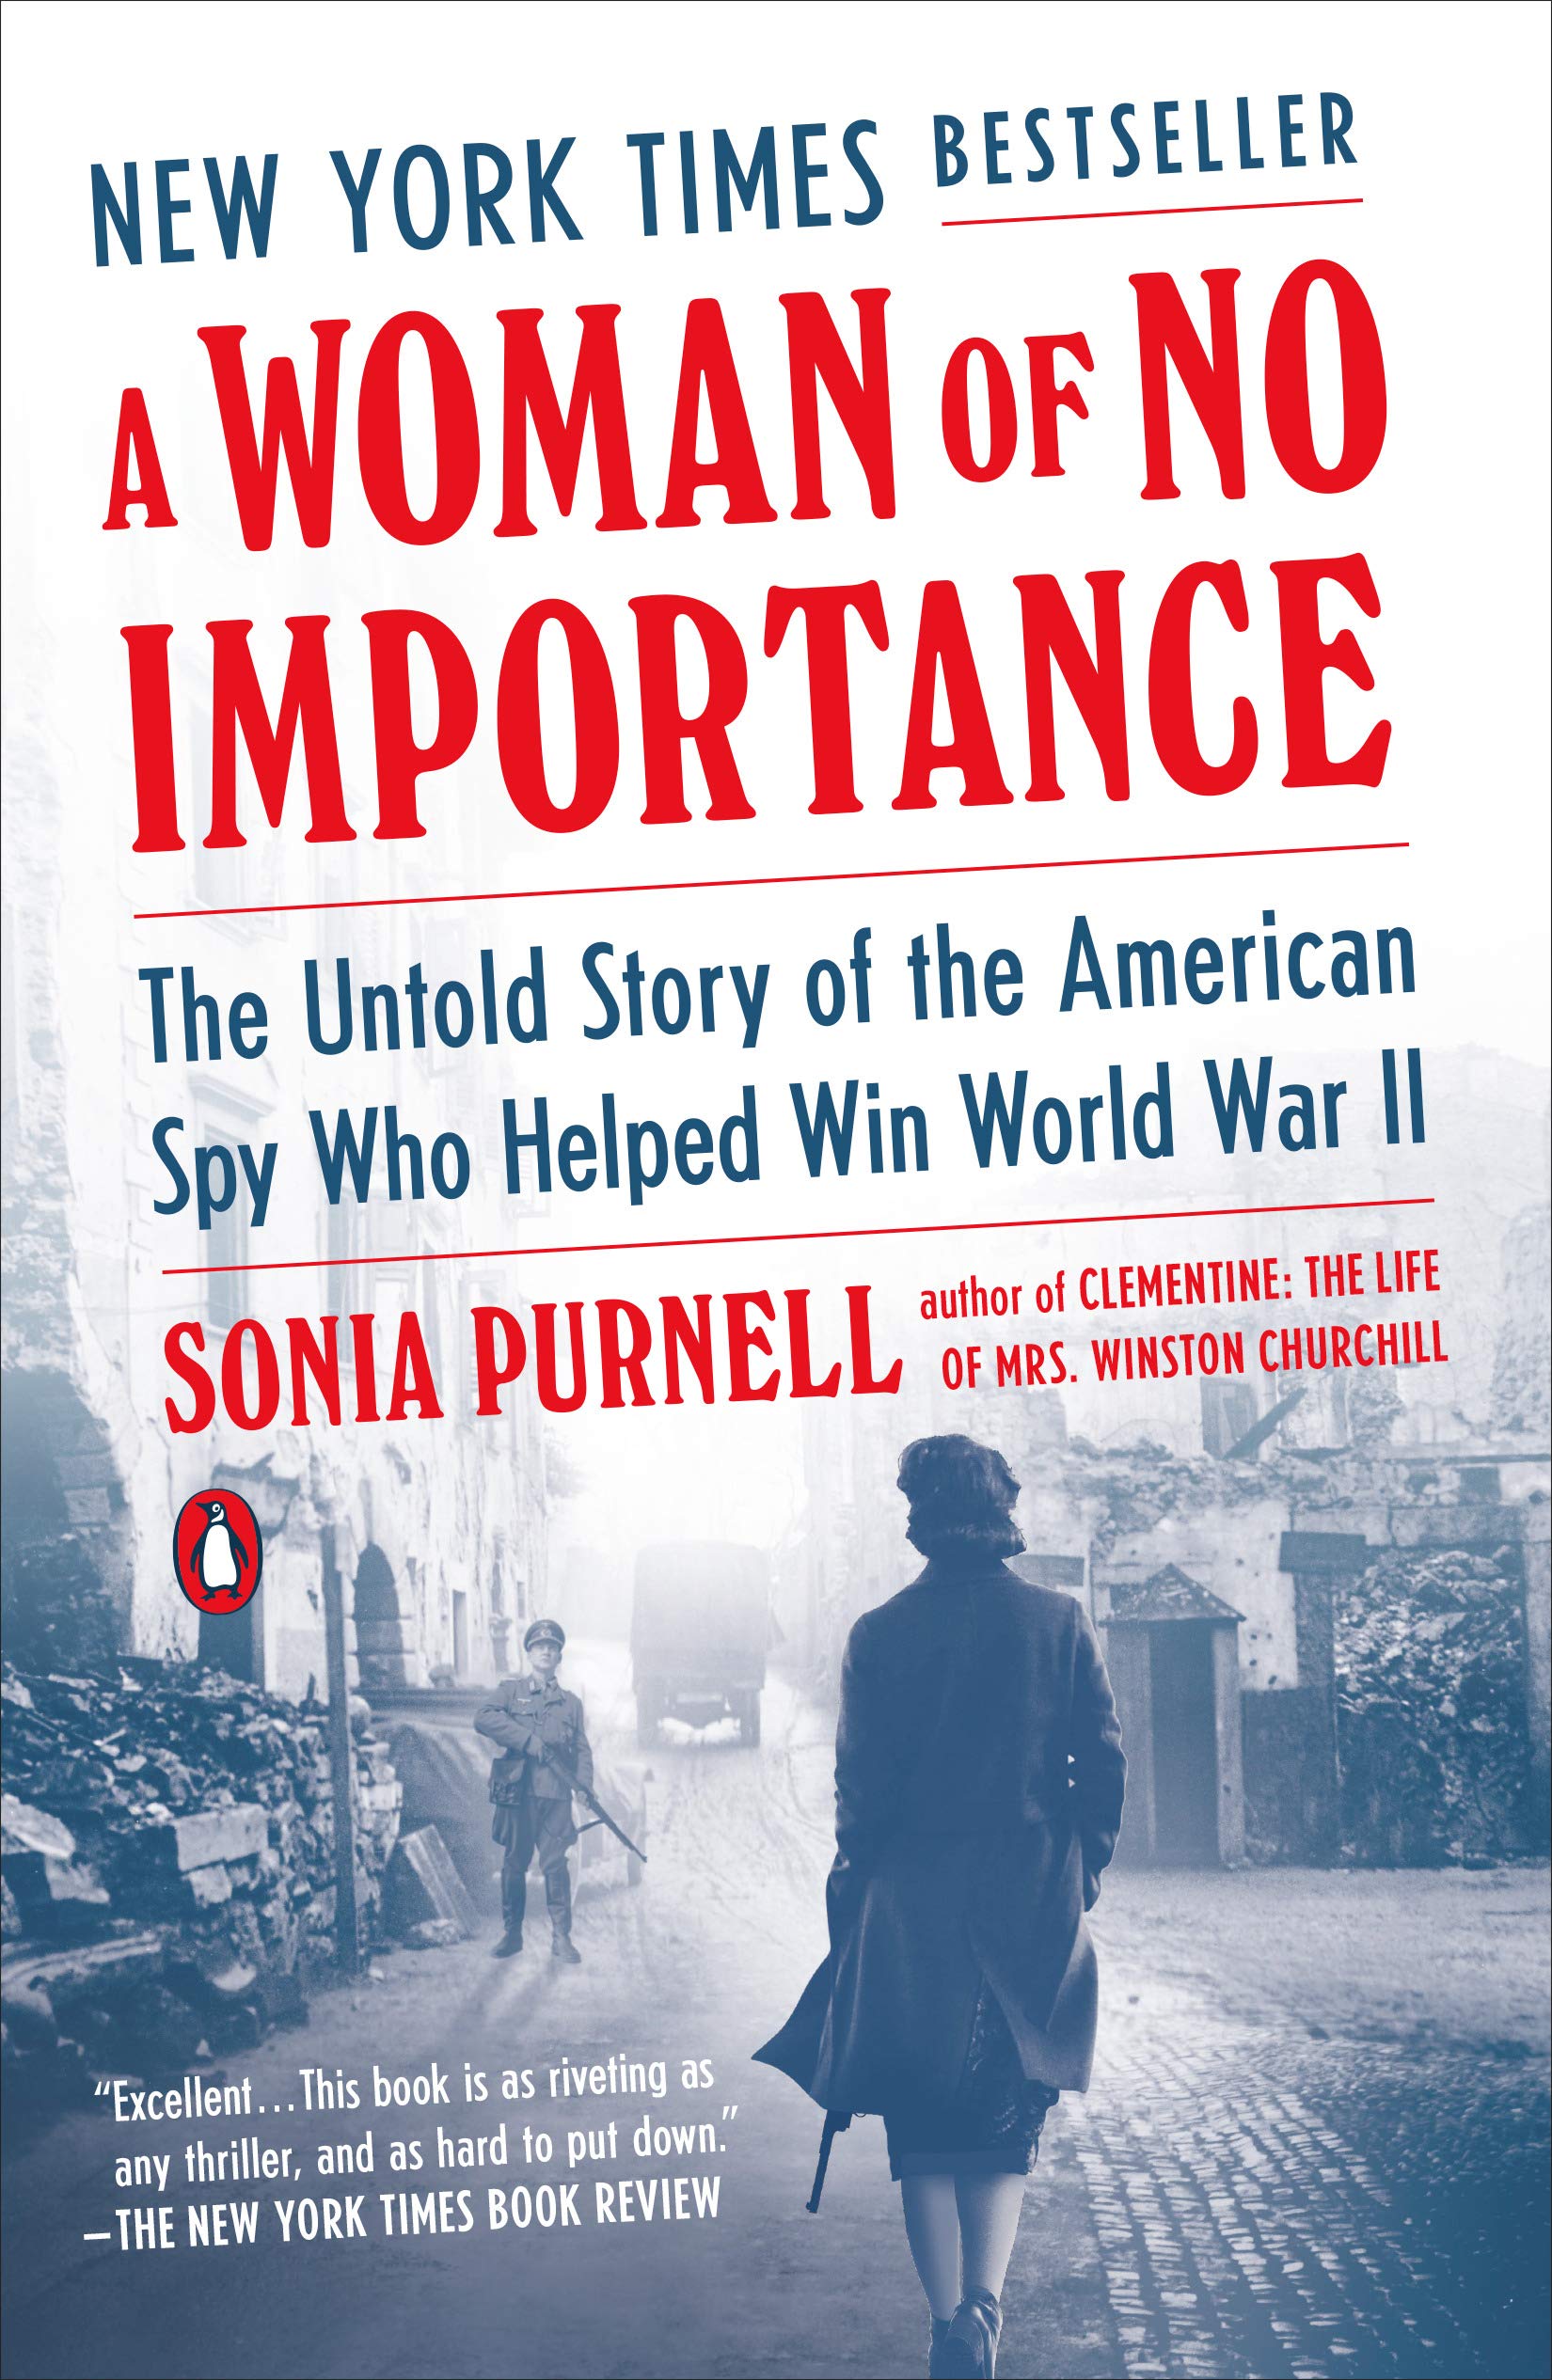 A Woman of No Importance: The Untold Story of the American Spy Who Helped Win World War II (eBook) by Sonia Purnell $1.99